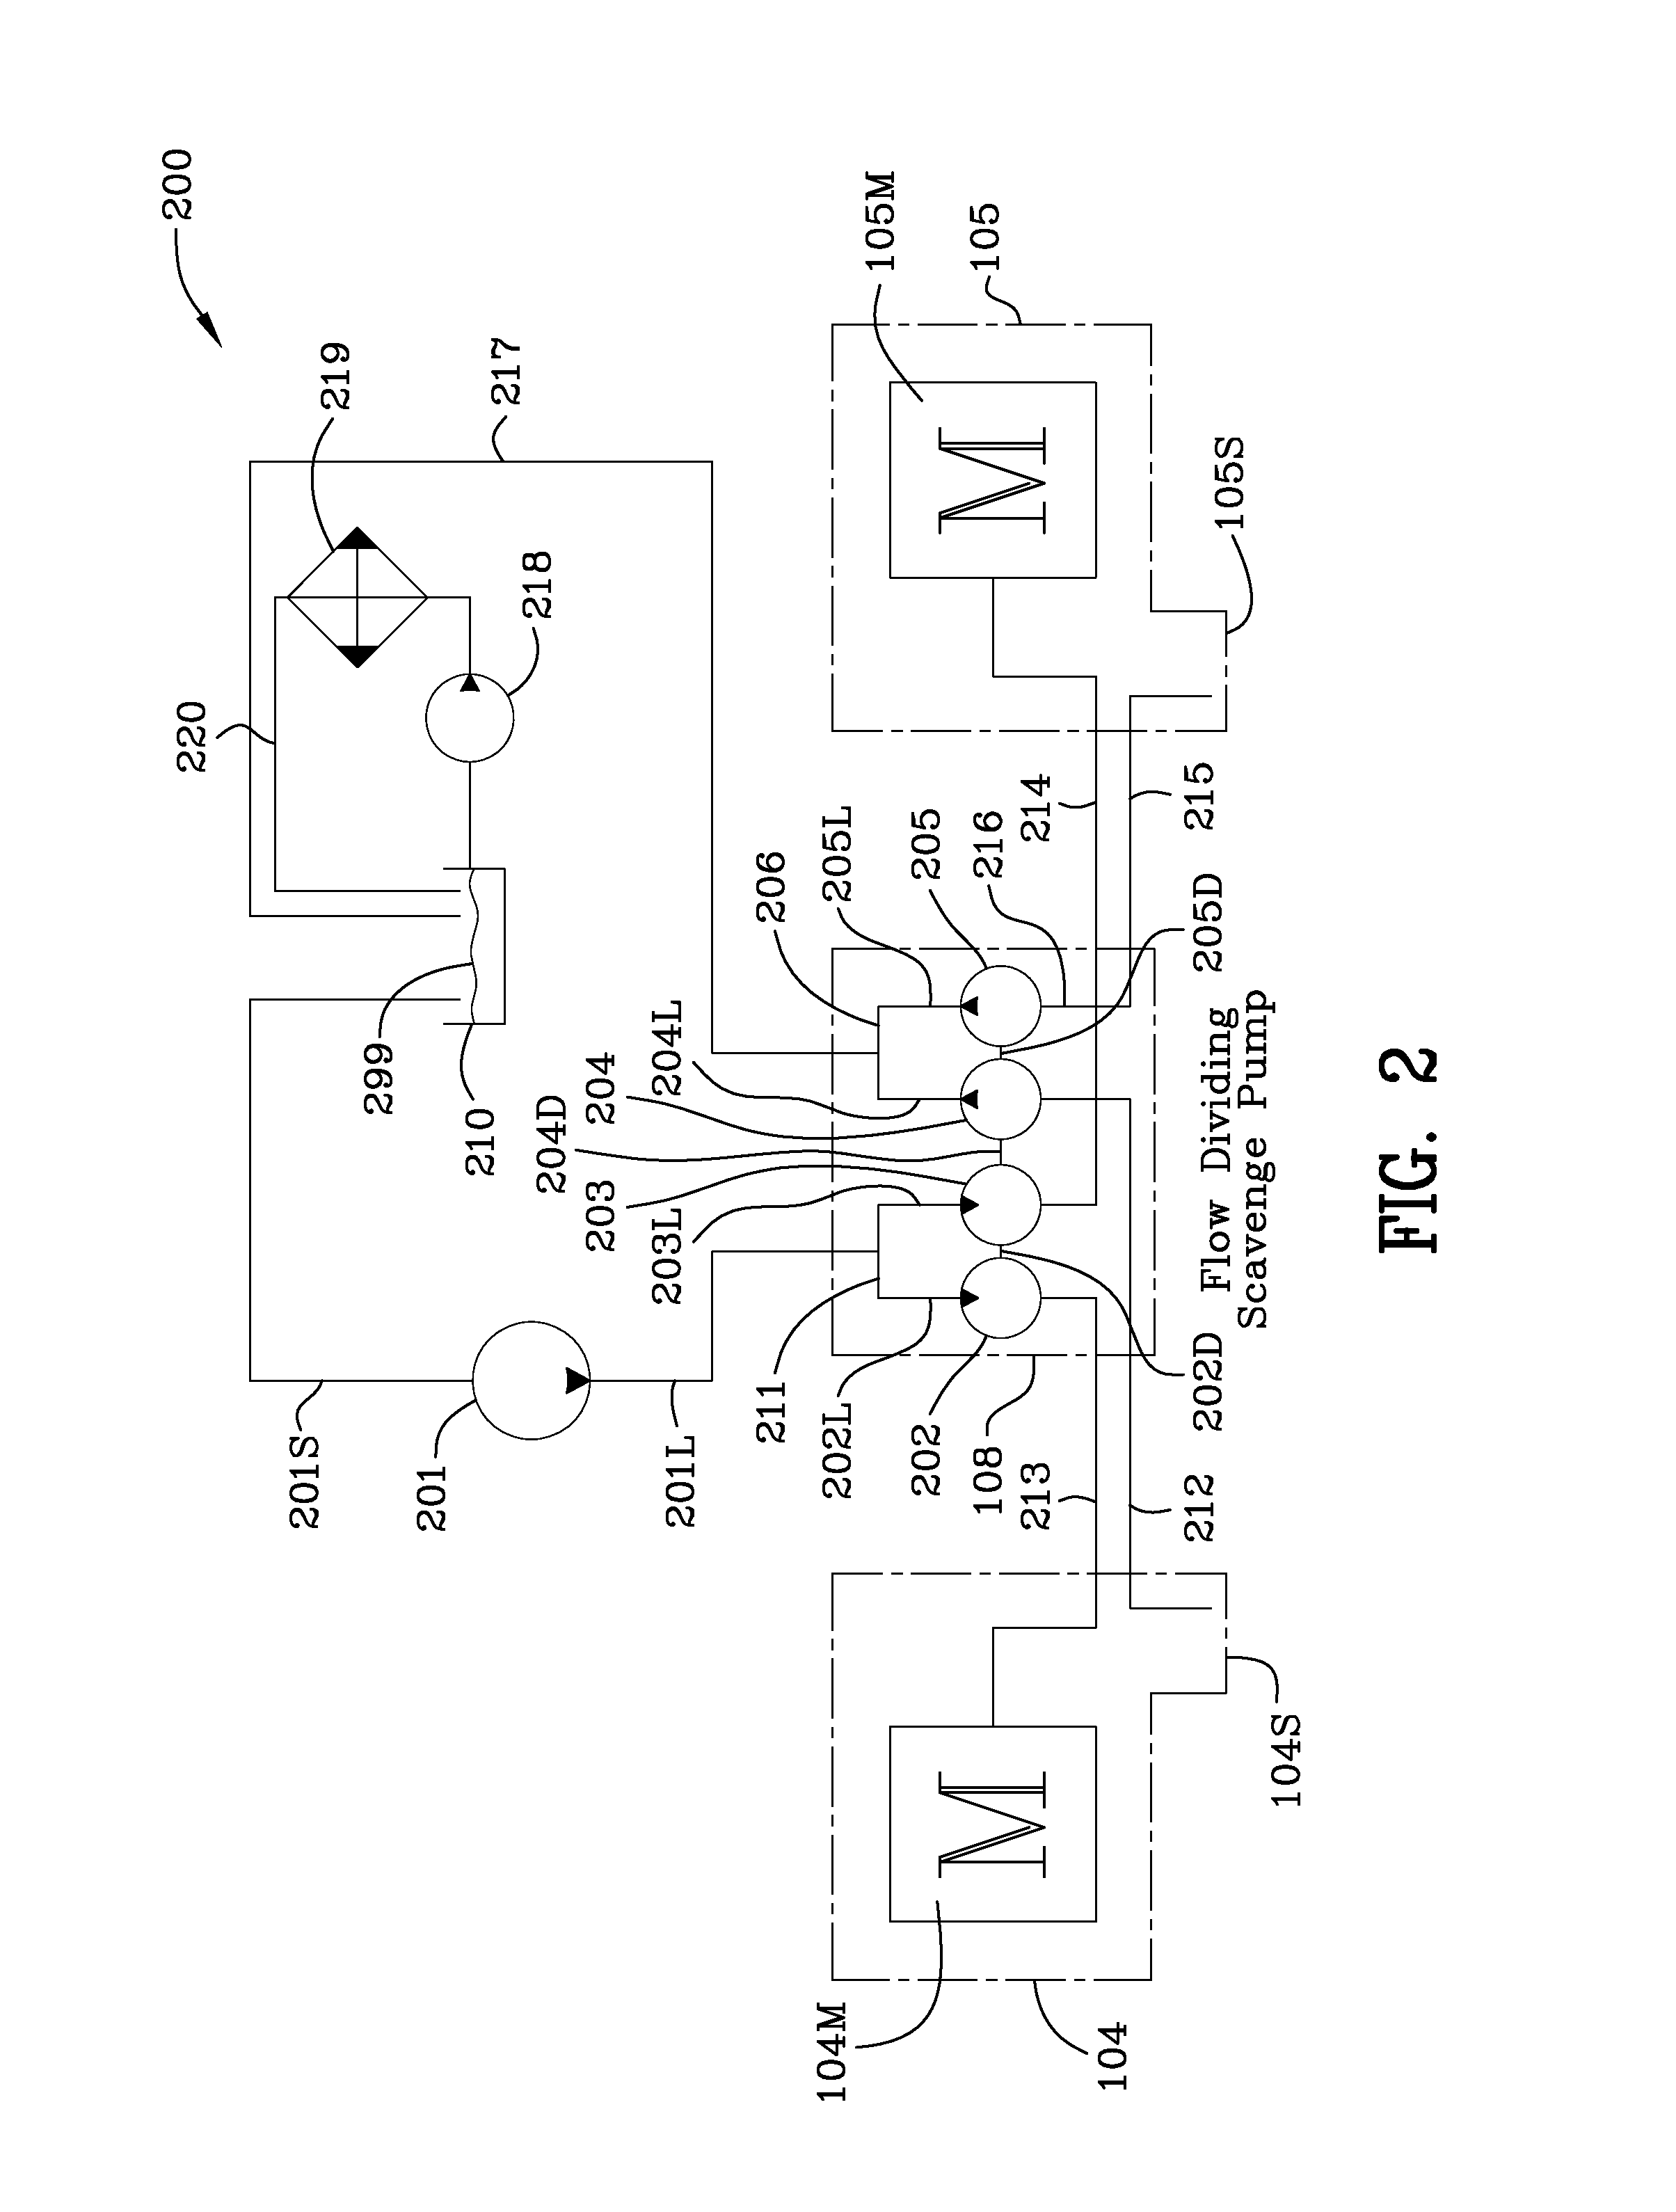 Wheel motor cooling system with equally divided flow